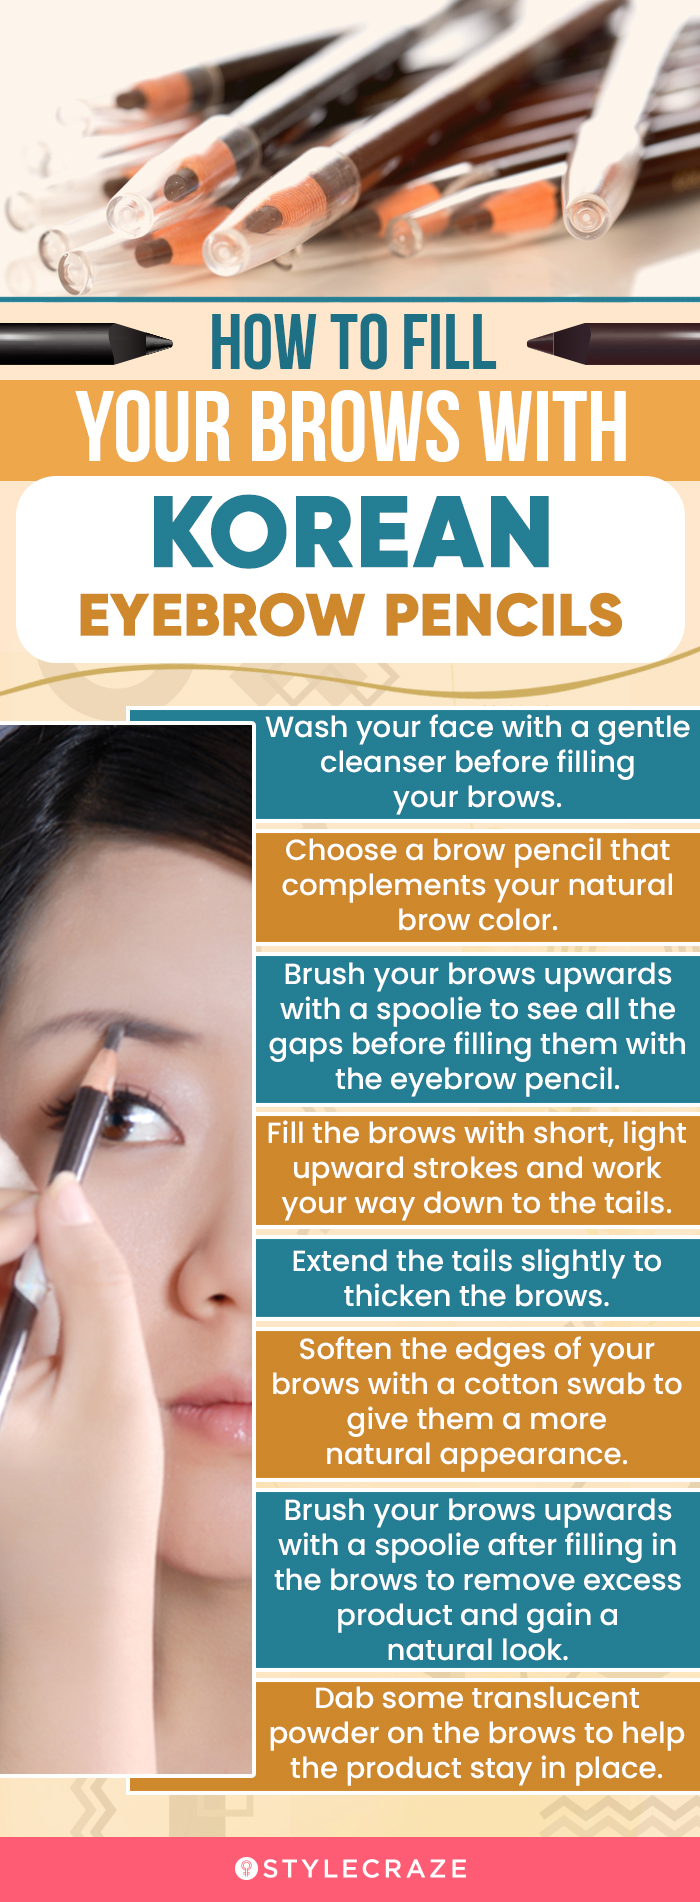 How To Fill Your Brows With Korean Eyebrow Pencils (infographic)